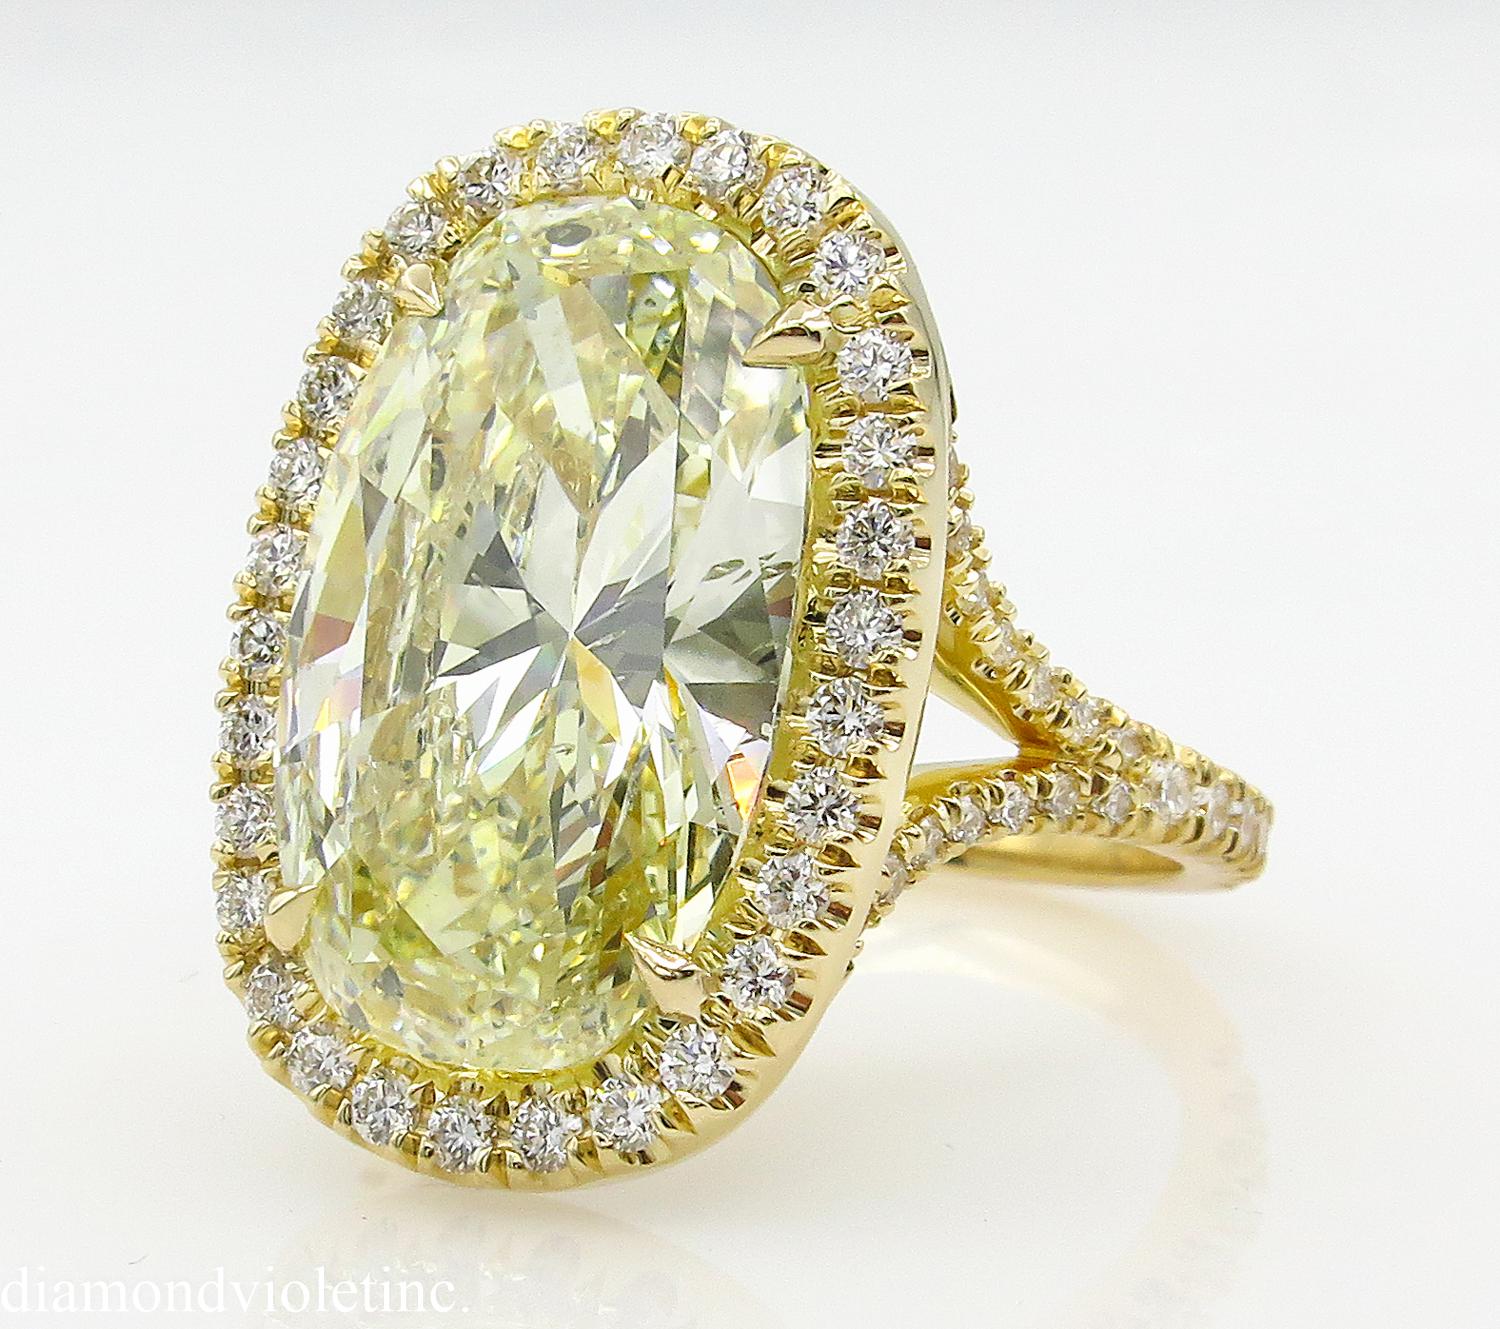 A Beautiful and Elegant Estate 18k Yellow Gold (stamped) Oval Diamond Engagement Ring with EGL USA Certified 6.47ct Oval Shaped Center Diamond in Light Yellow color SI2 clarity (Eye Clear). The measurements of the Center Stone are